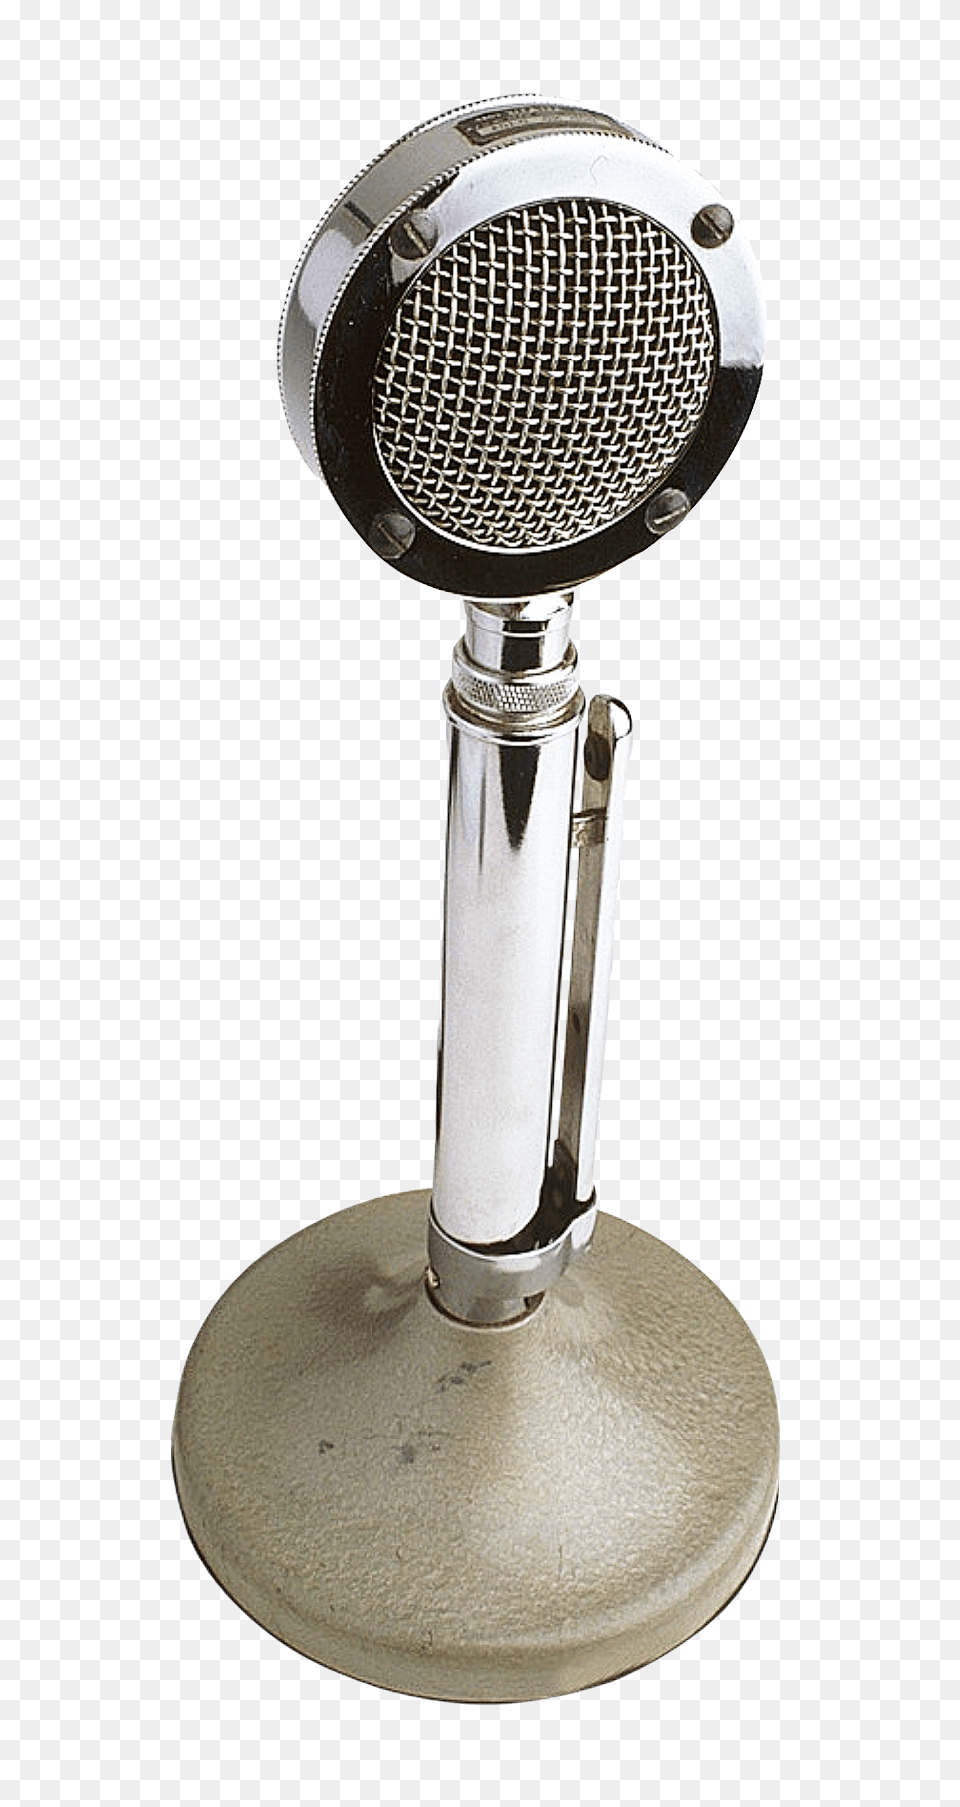 Microphone Image Purepng Transparent Cc0 Microphone, Electrical Device, Smoke Pipe Free Png Download